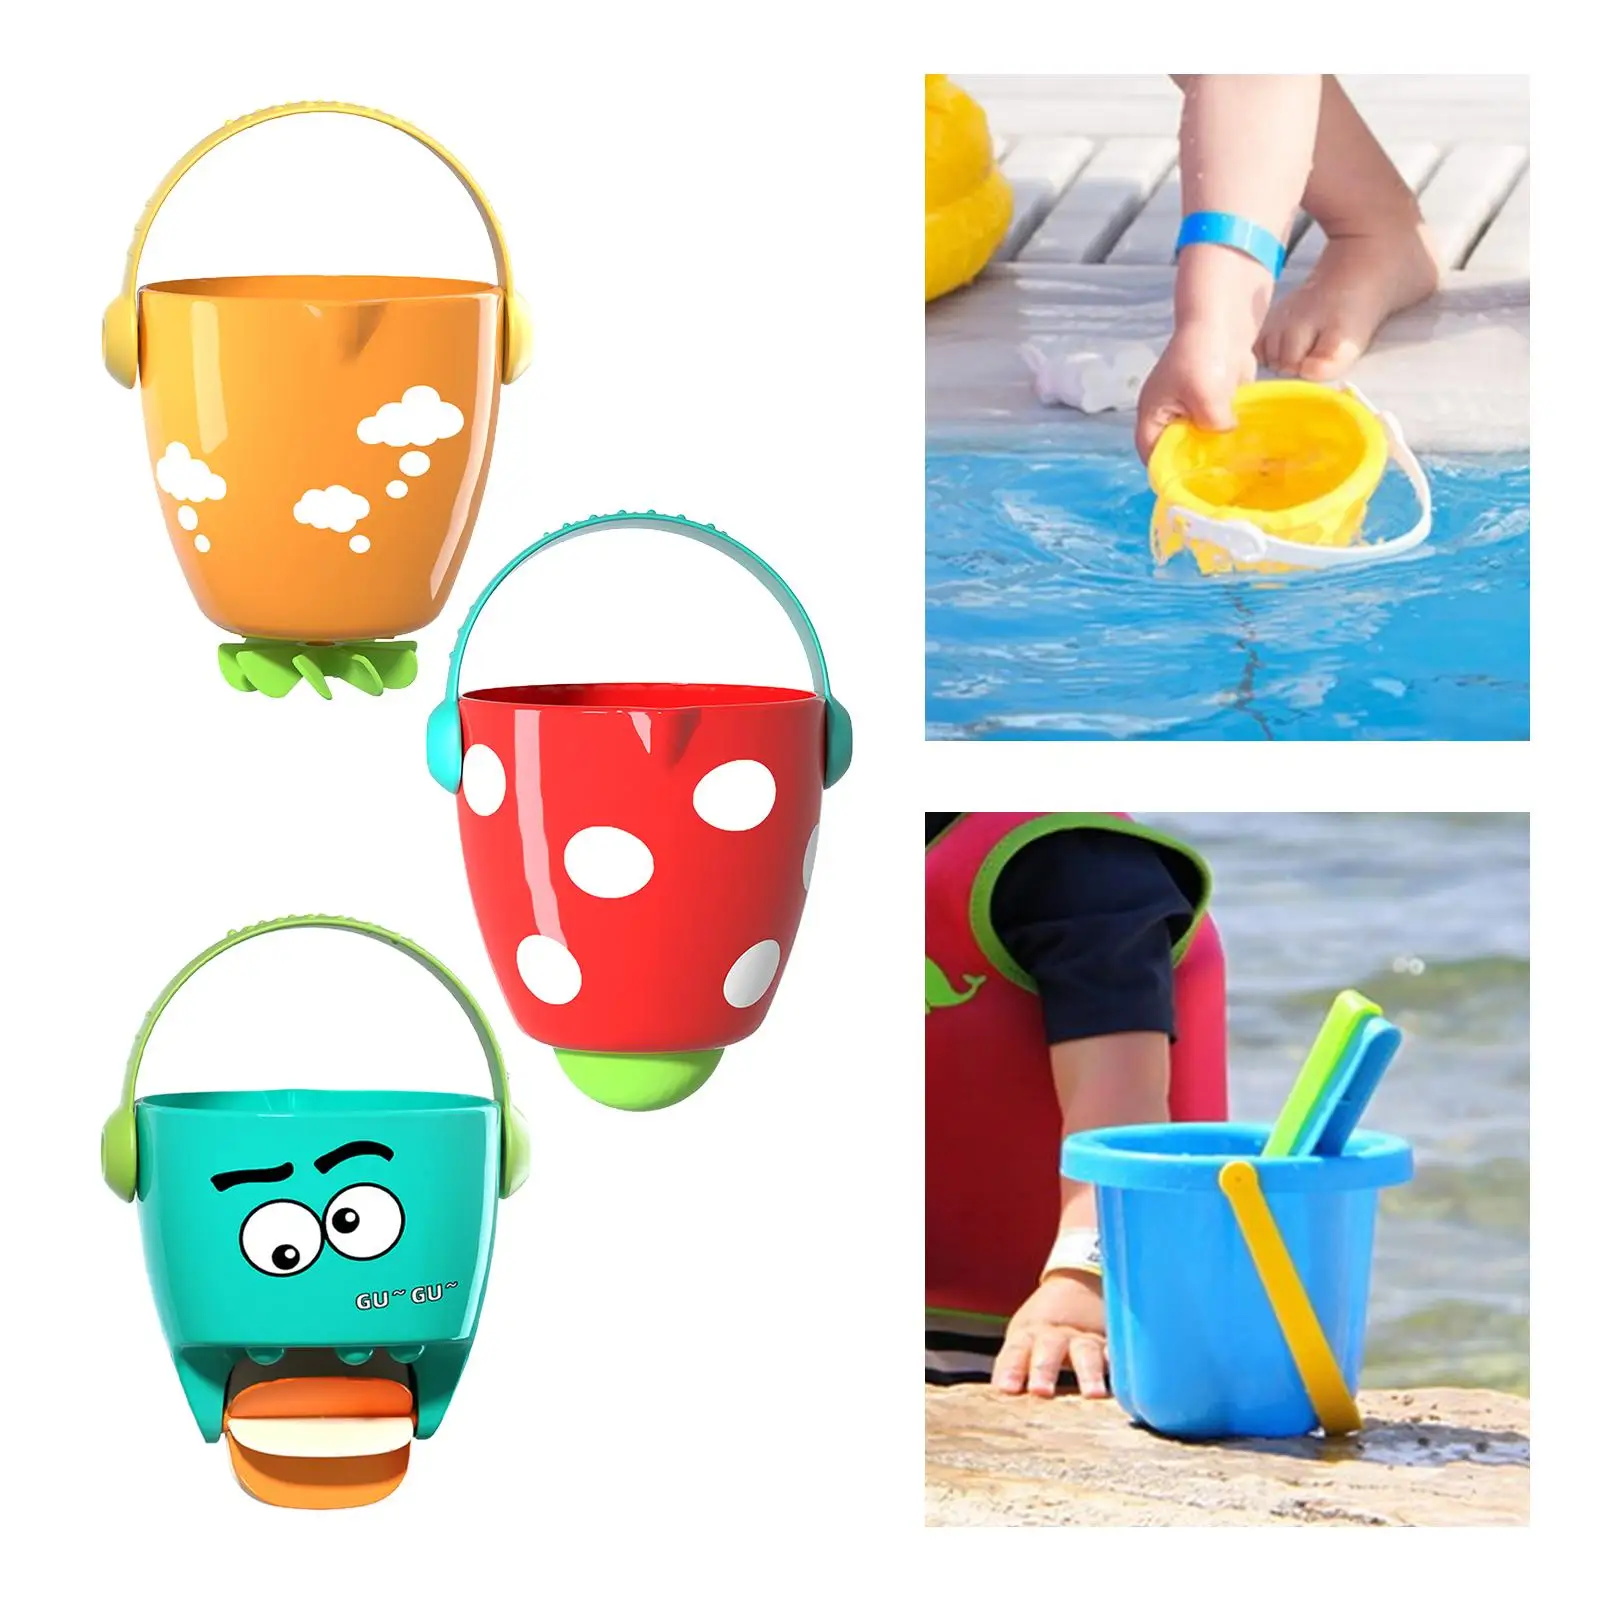 Sand Playing Basket Bath Tub Toy Swimming Toy Playing Water Toy Baby Bath Toy for Infants Beach Bathtub Swimming Pool Baby